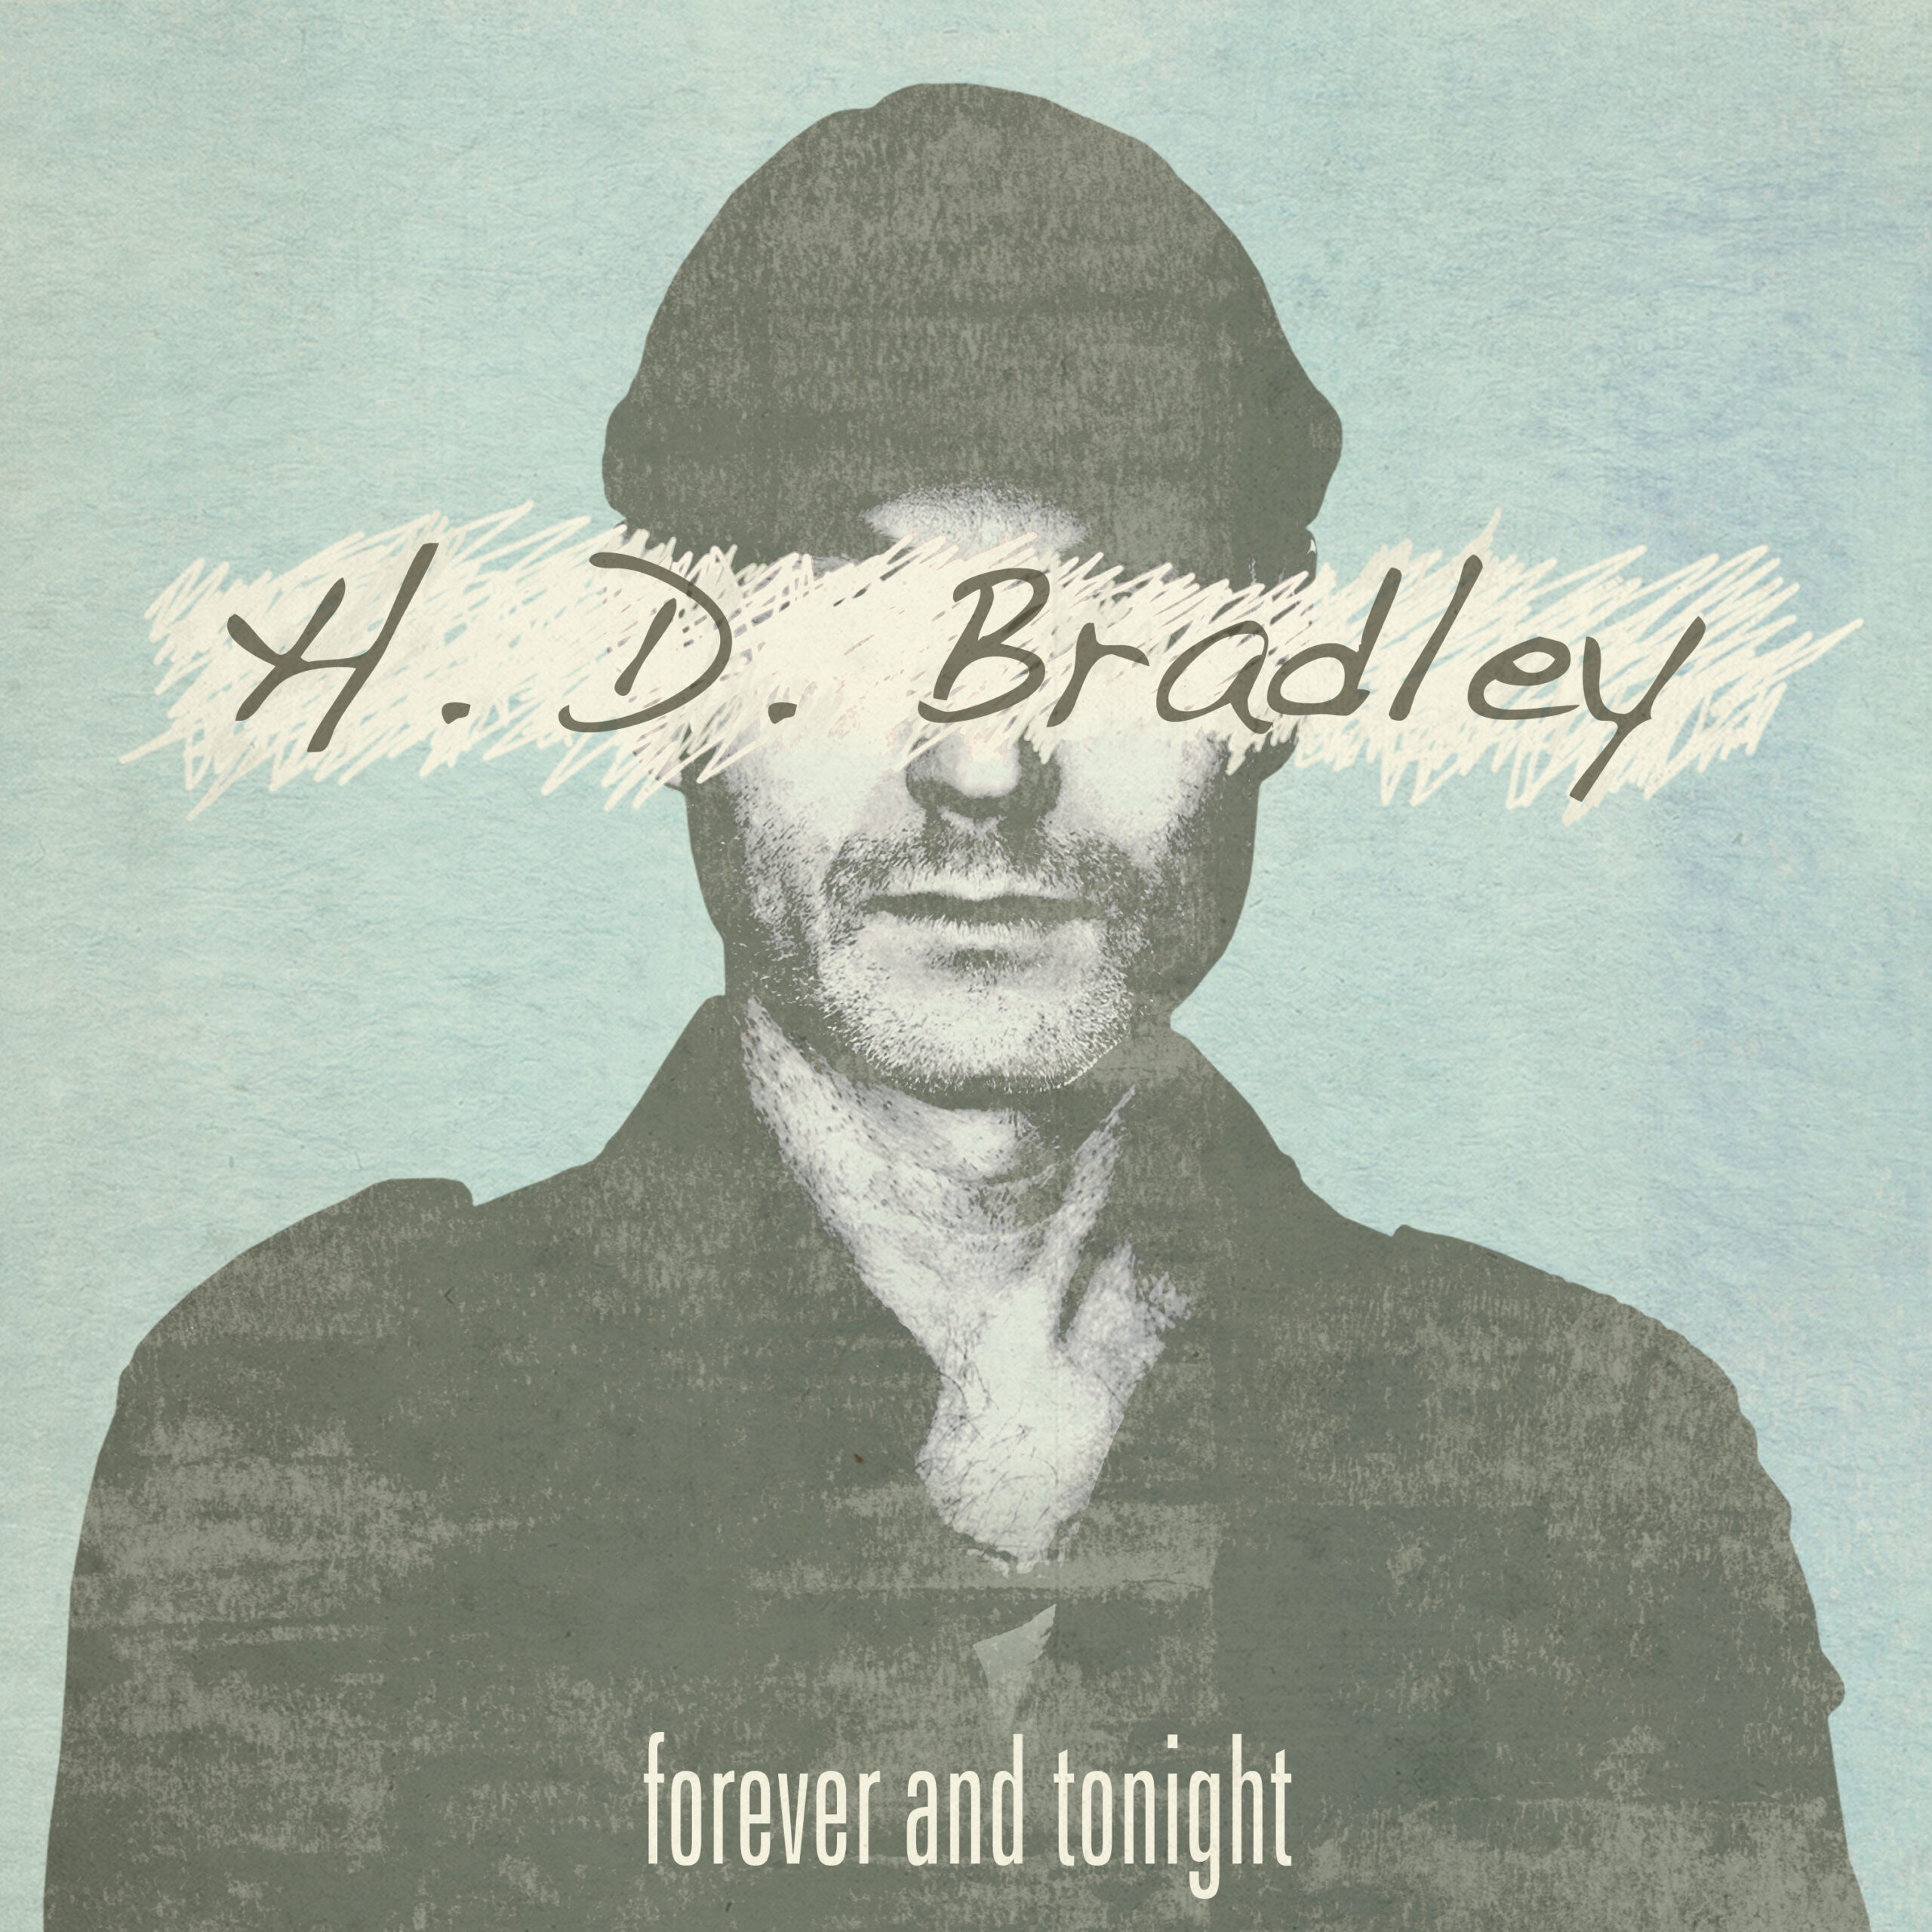 HD Bradley – “Forever and Tonight”